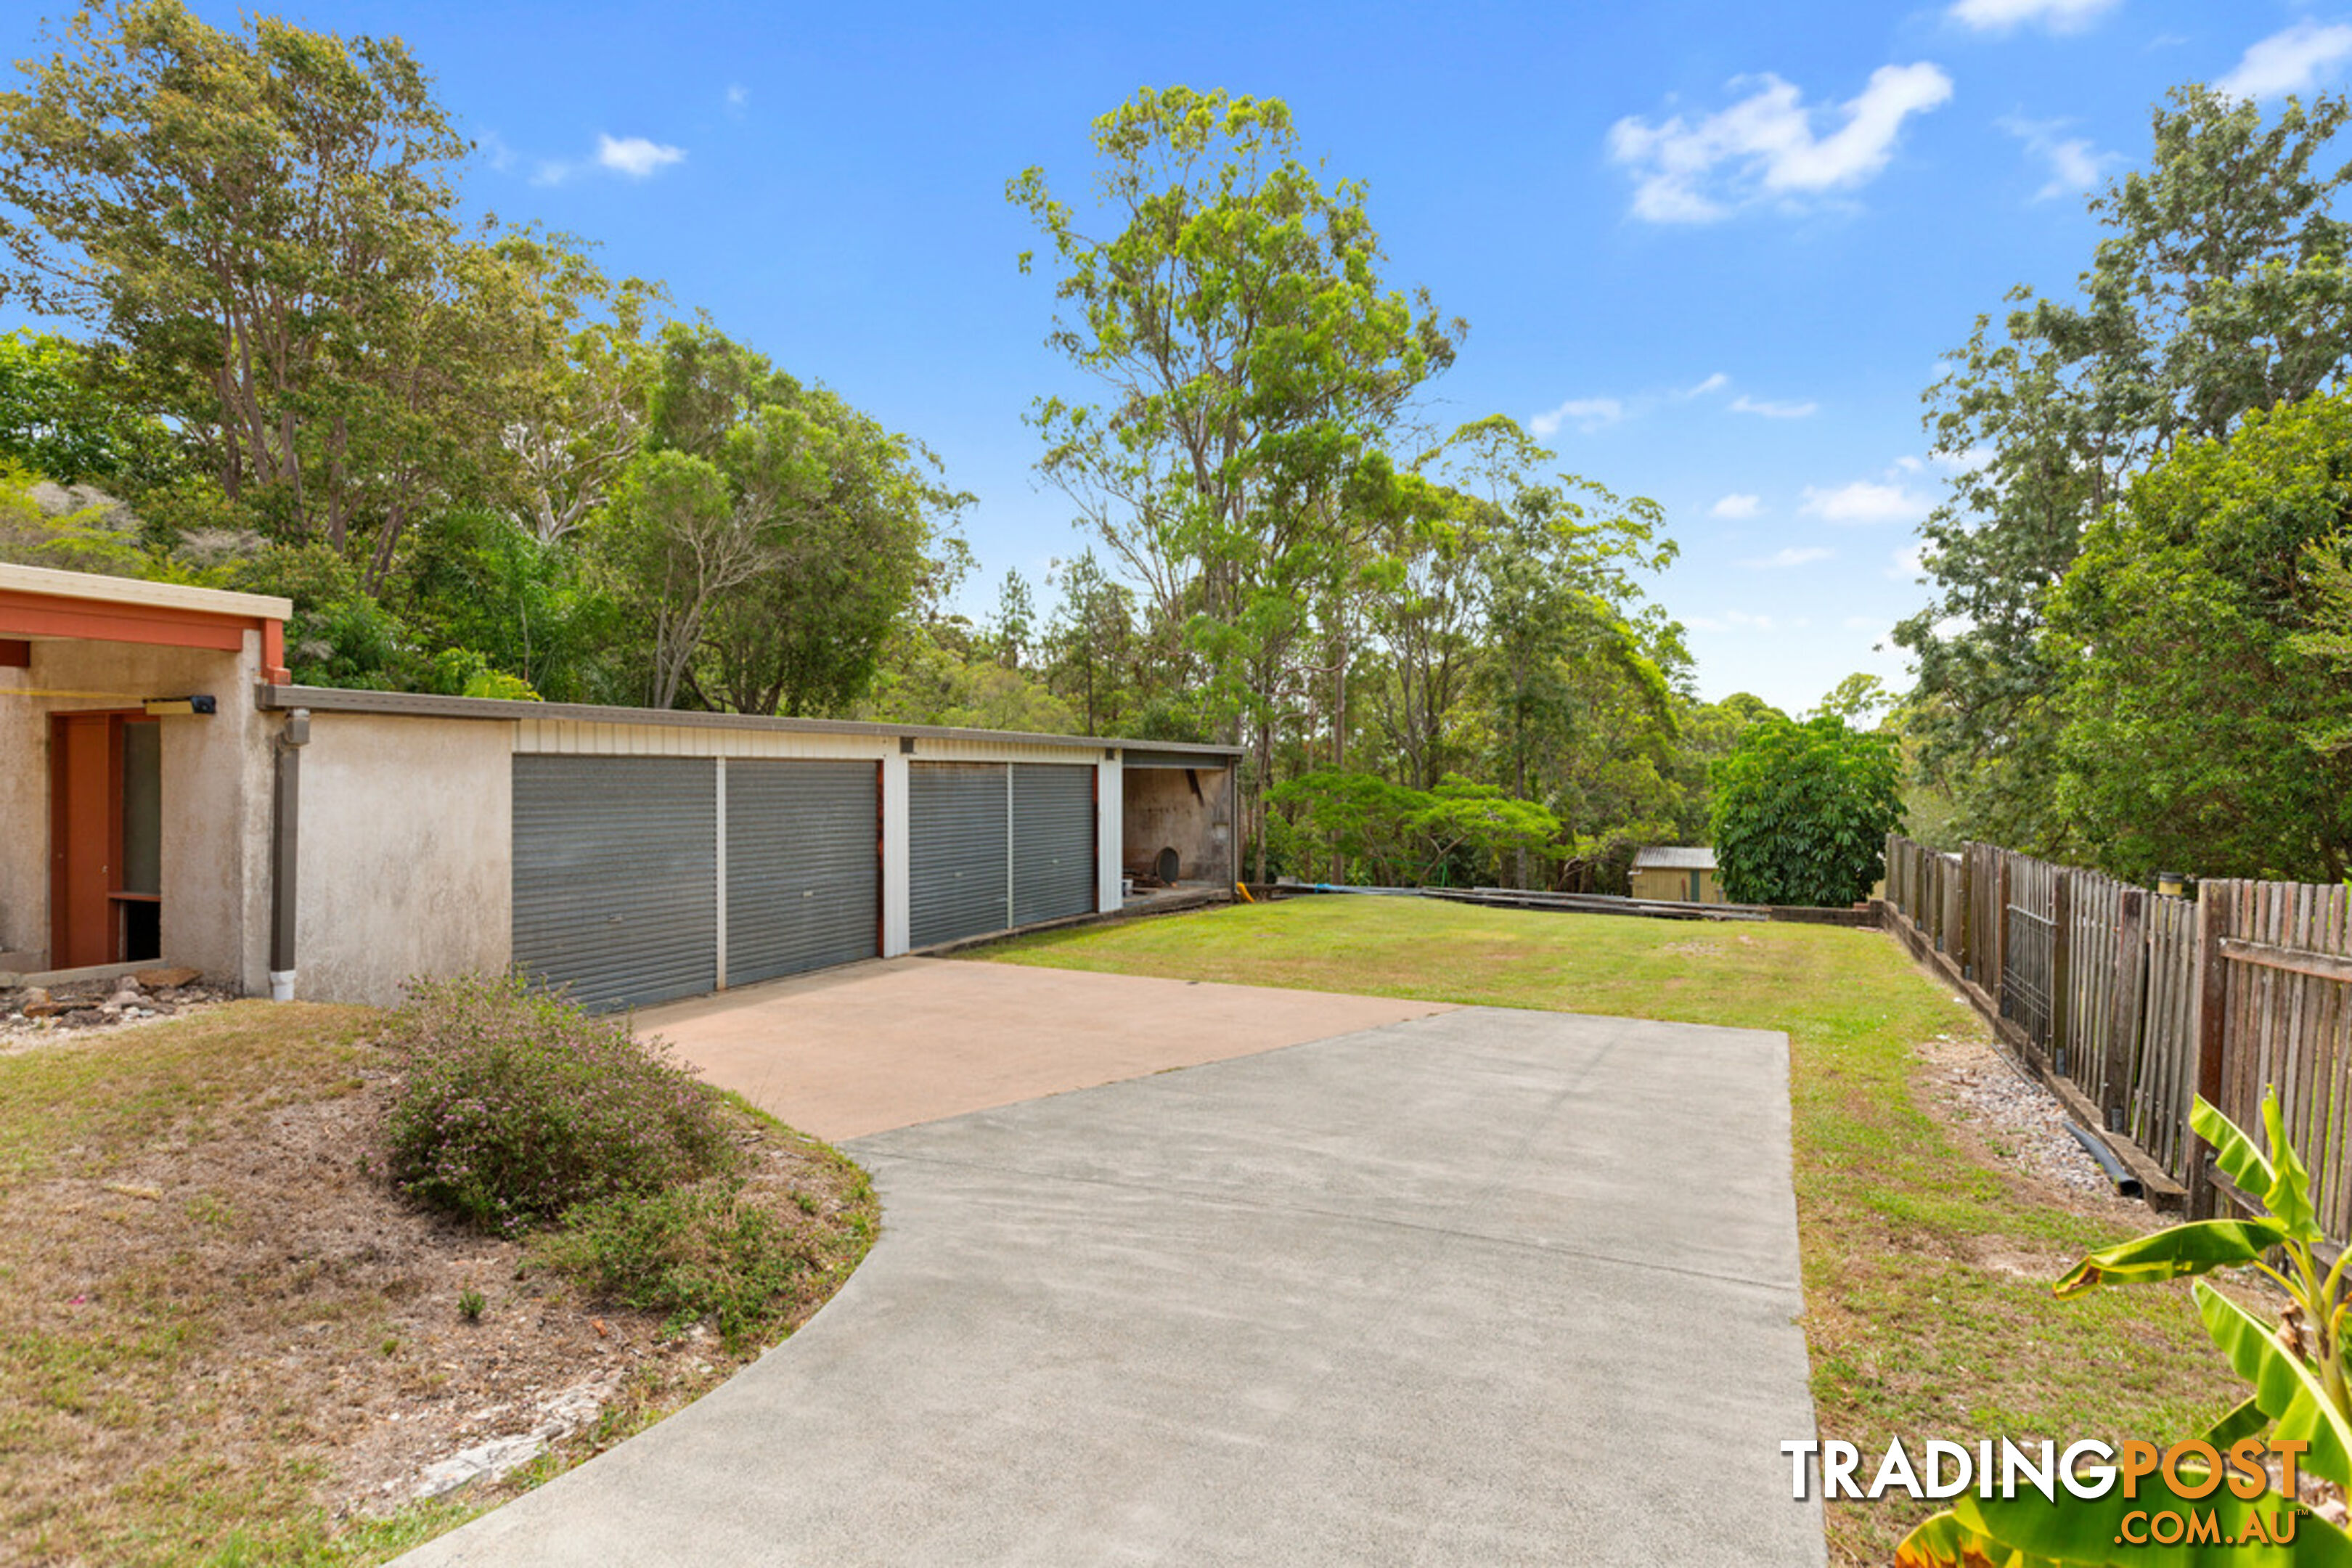 60-66 Boundary Road THORNLANDS QLD 4164